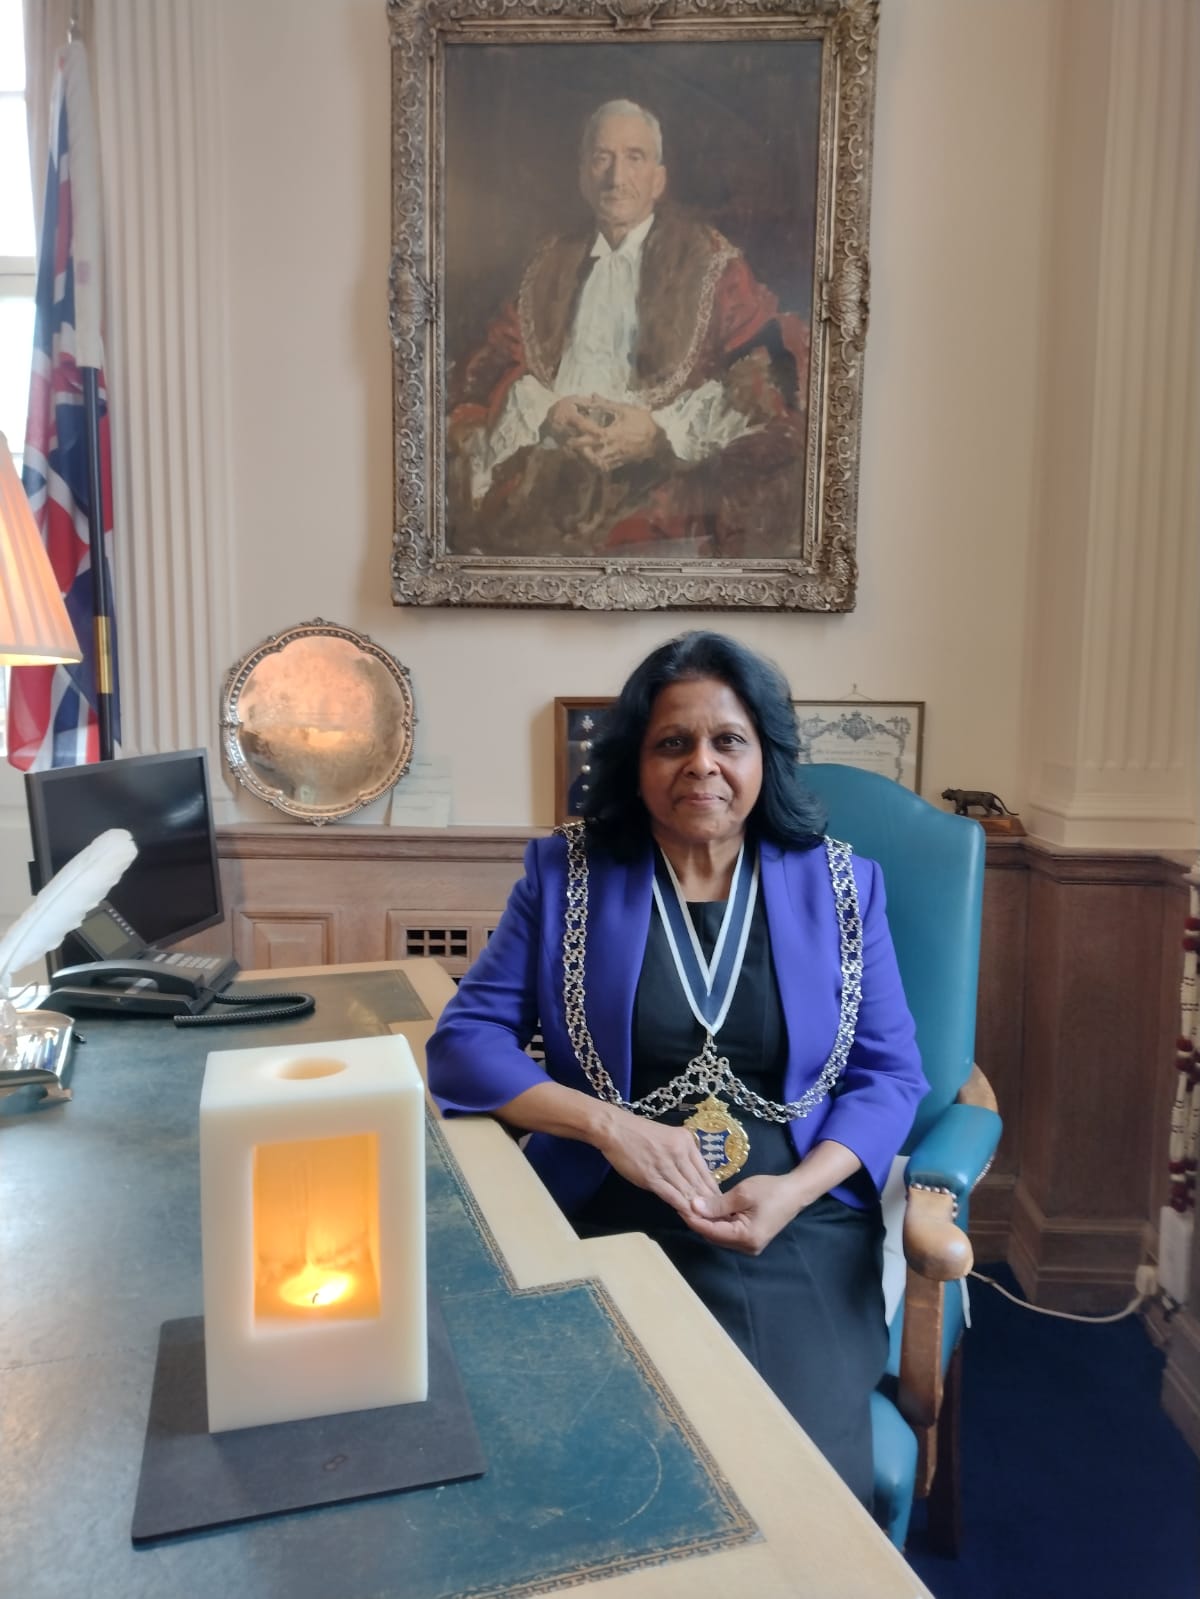 The Mayor of Kingston on Holocaust Memorial Day